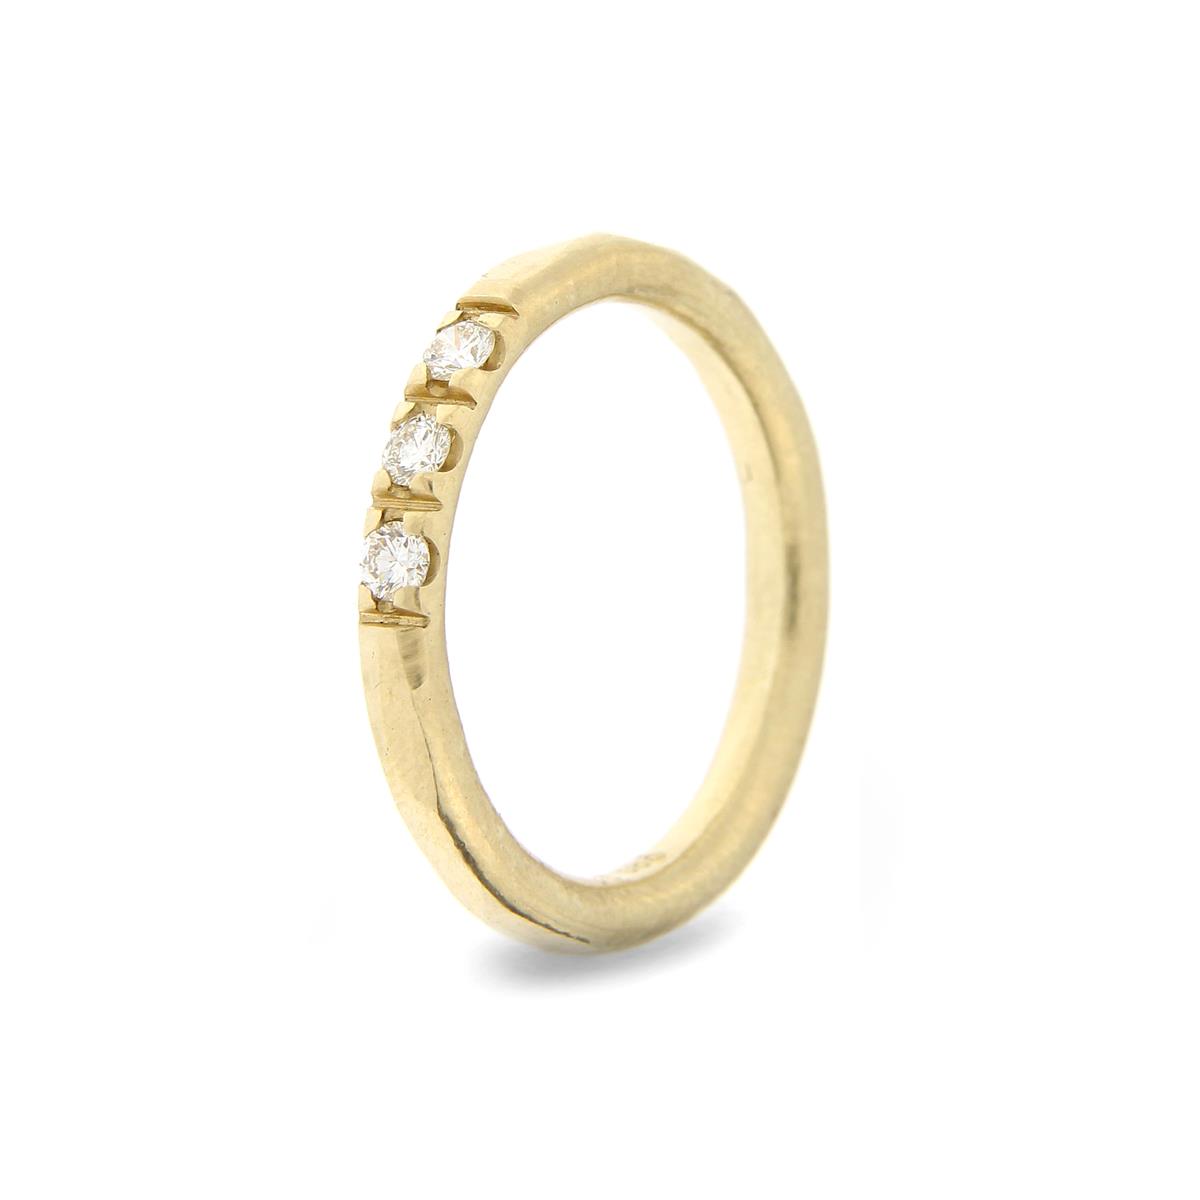 Katie g. Jewellery_Hammered Ring 2,5mm - Champ Gold 1 + 3 Diamonds